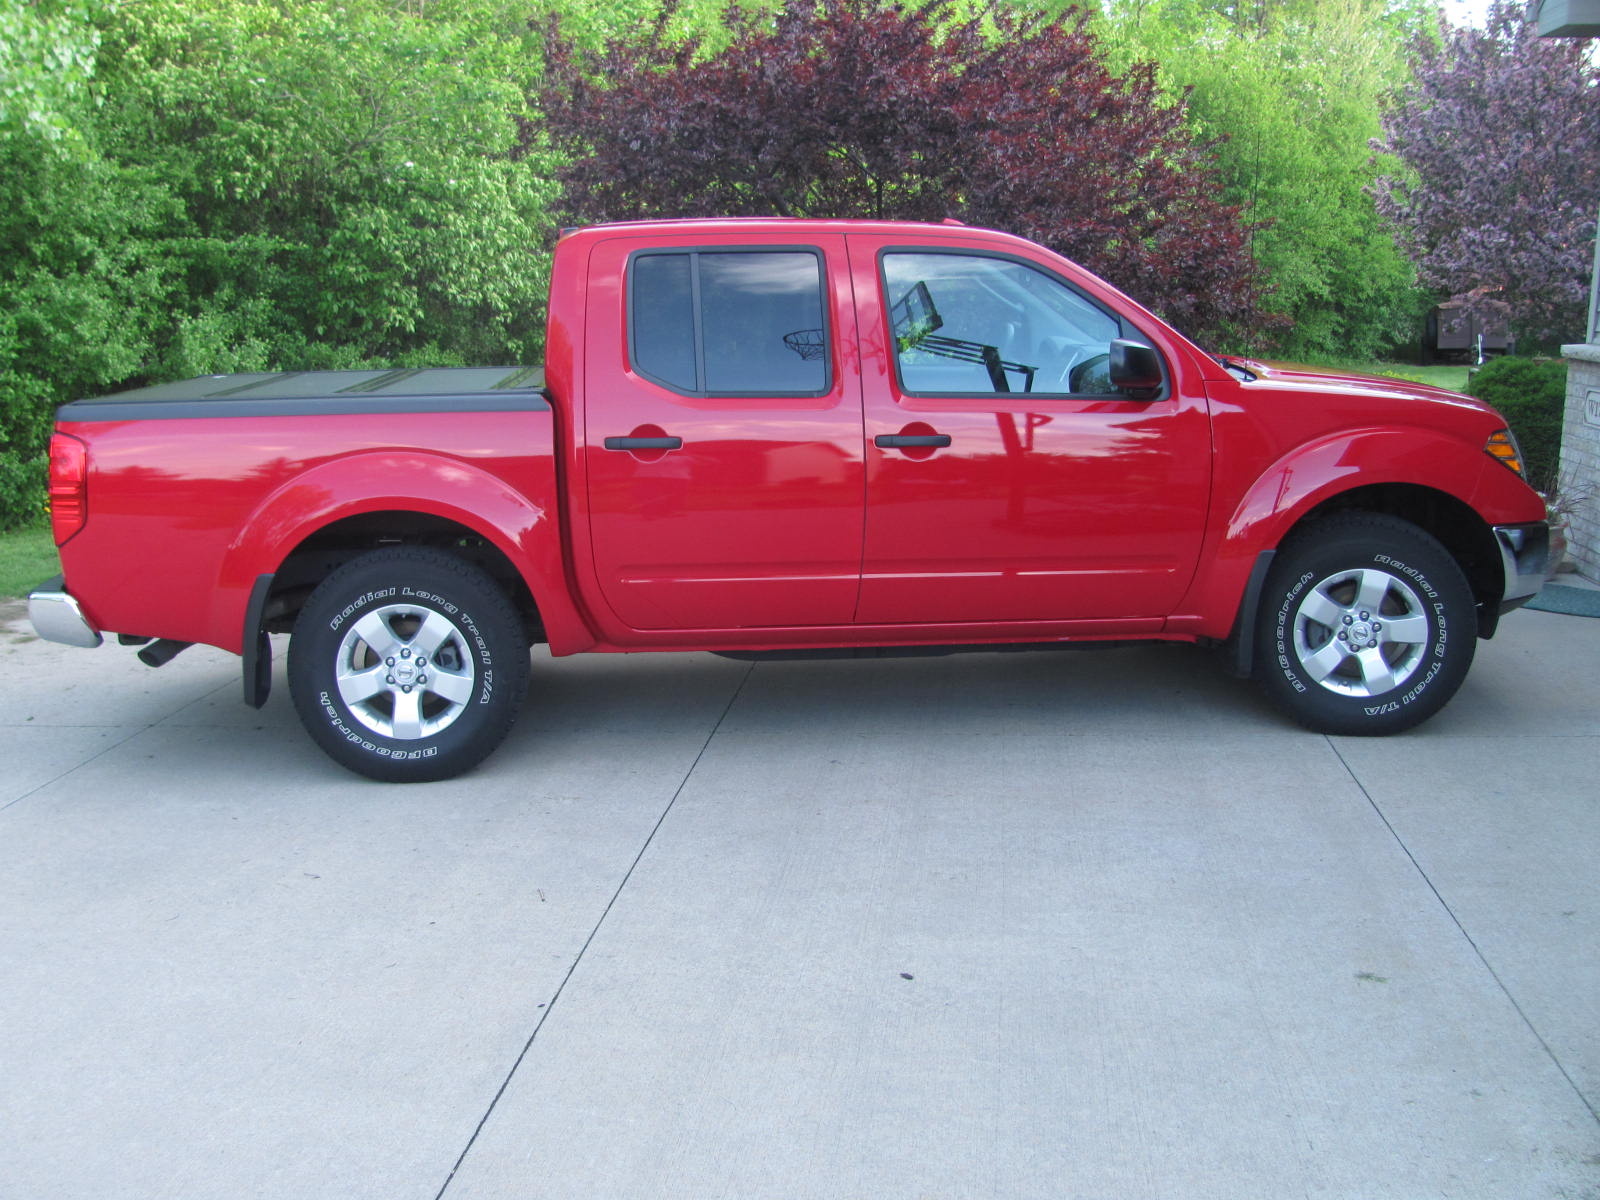 2011 Nissan frontier sv reviews #4